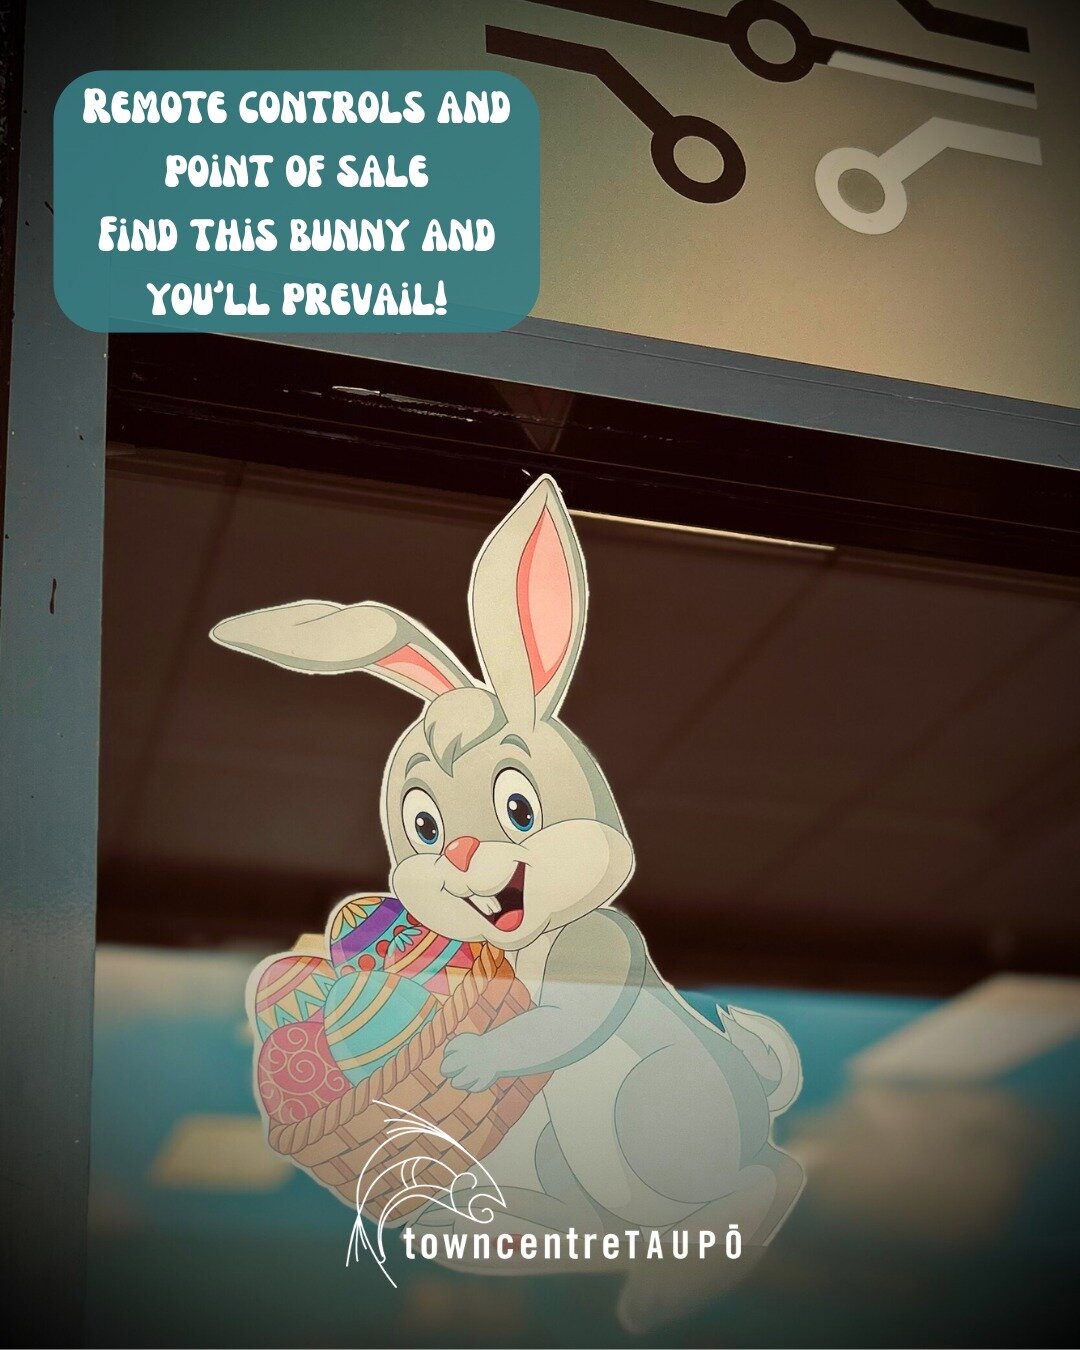 This is the final Easter Bunny Poem Hint!  Bring your forms back to Spacecraft by tomorrow!

Bunnies, bunnies all over town,
Can you find them all around?
Taupō Town Centre, you&rsquo;ll find their paw.
See at least 10 and be into the draw.

They may